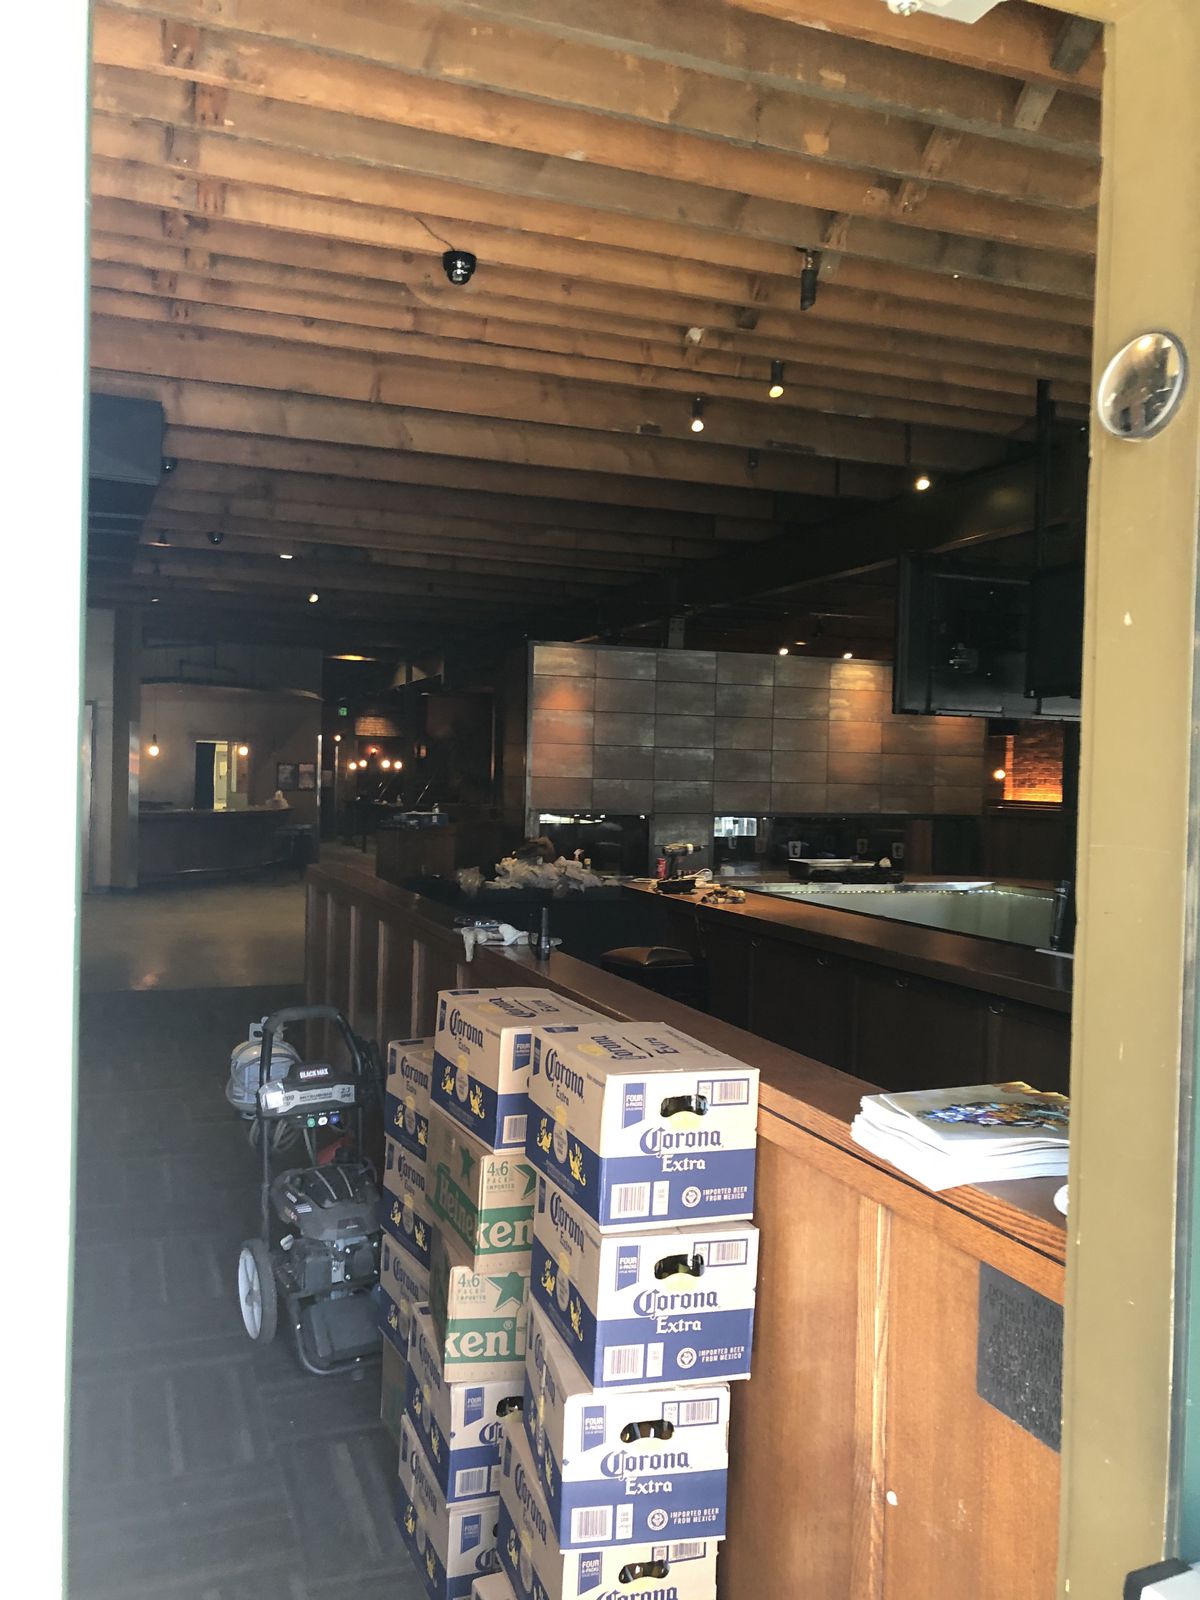 A picture taken into the now-shuttered Cowboy Lounge showing stacked beer boxes near the door